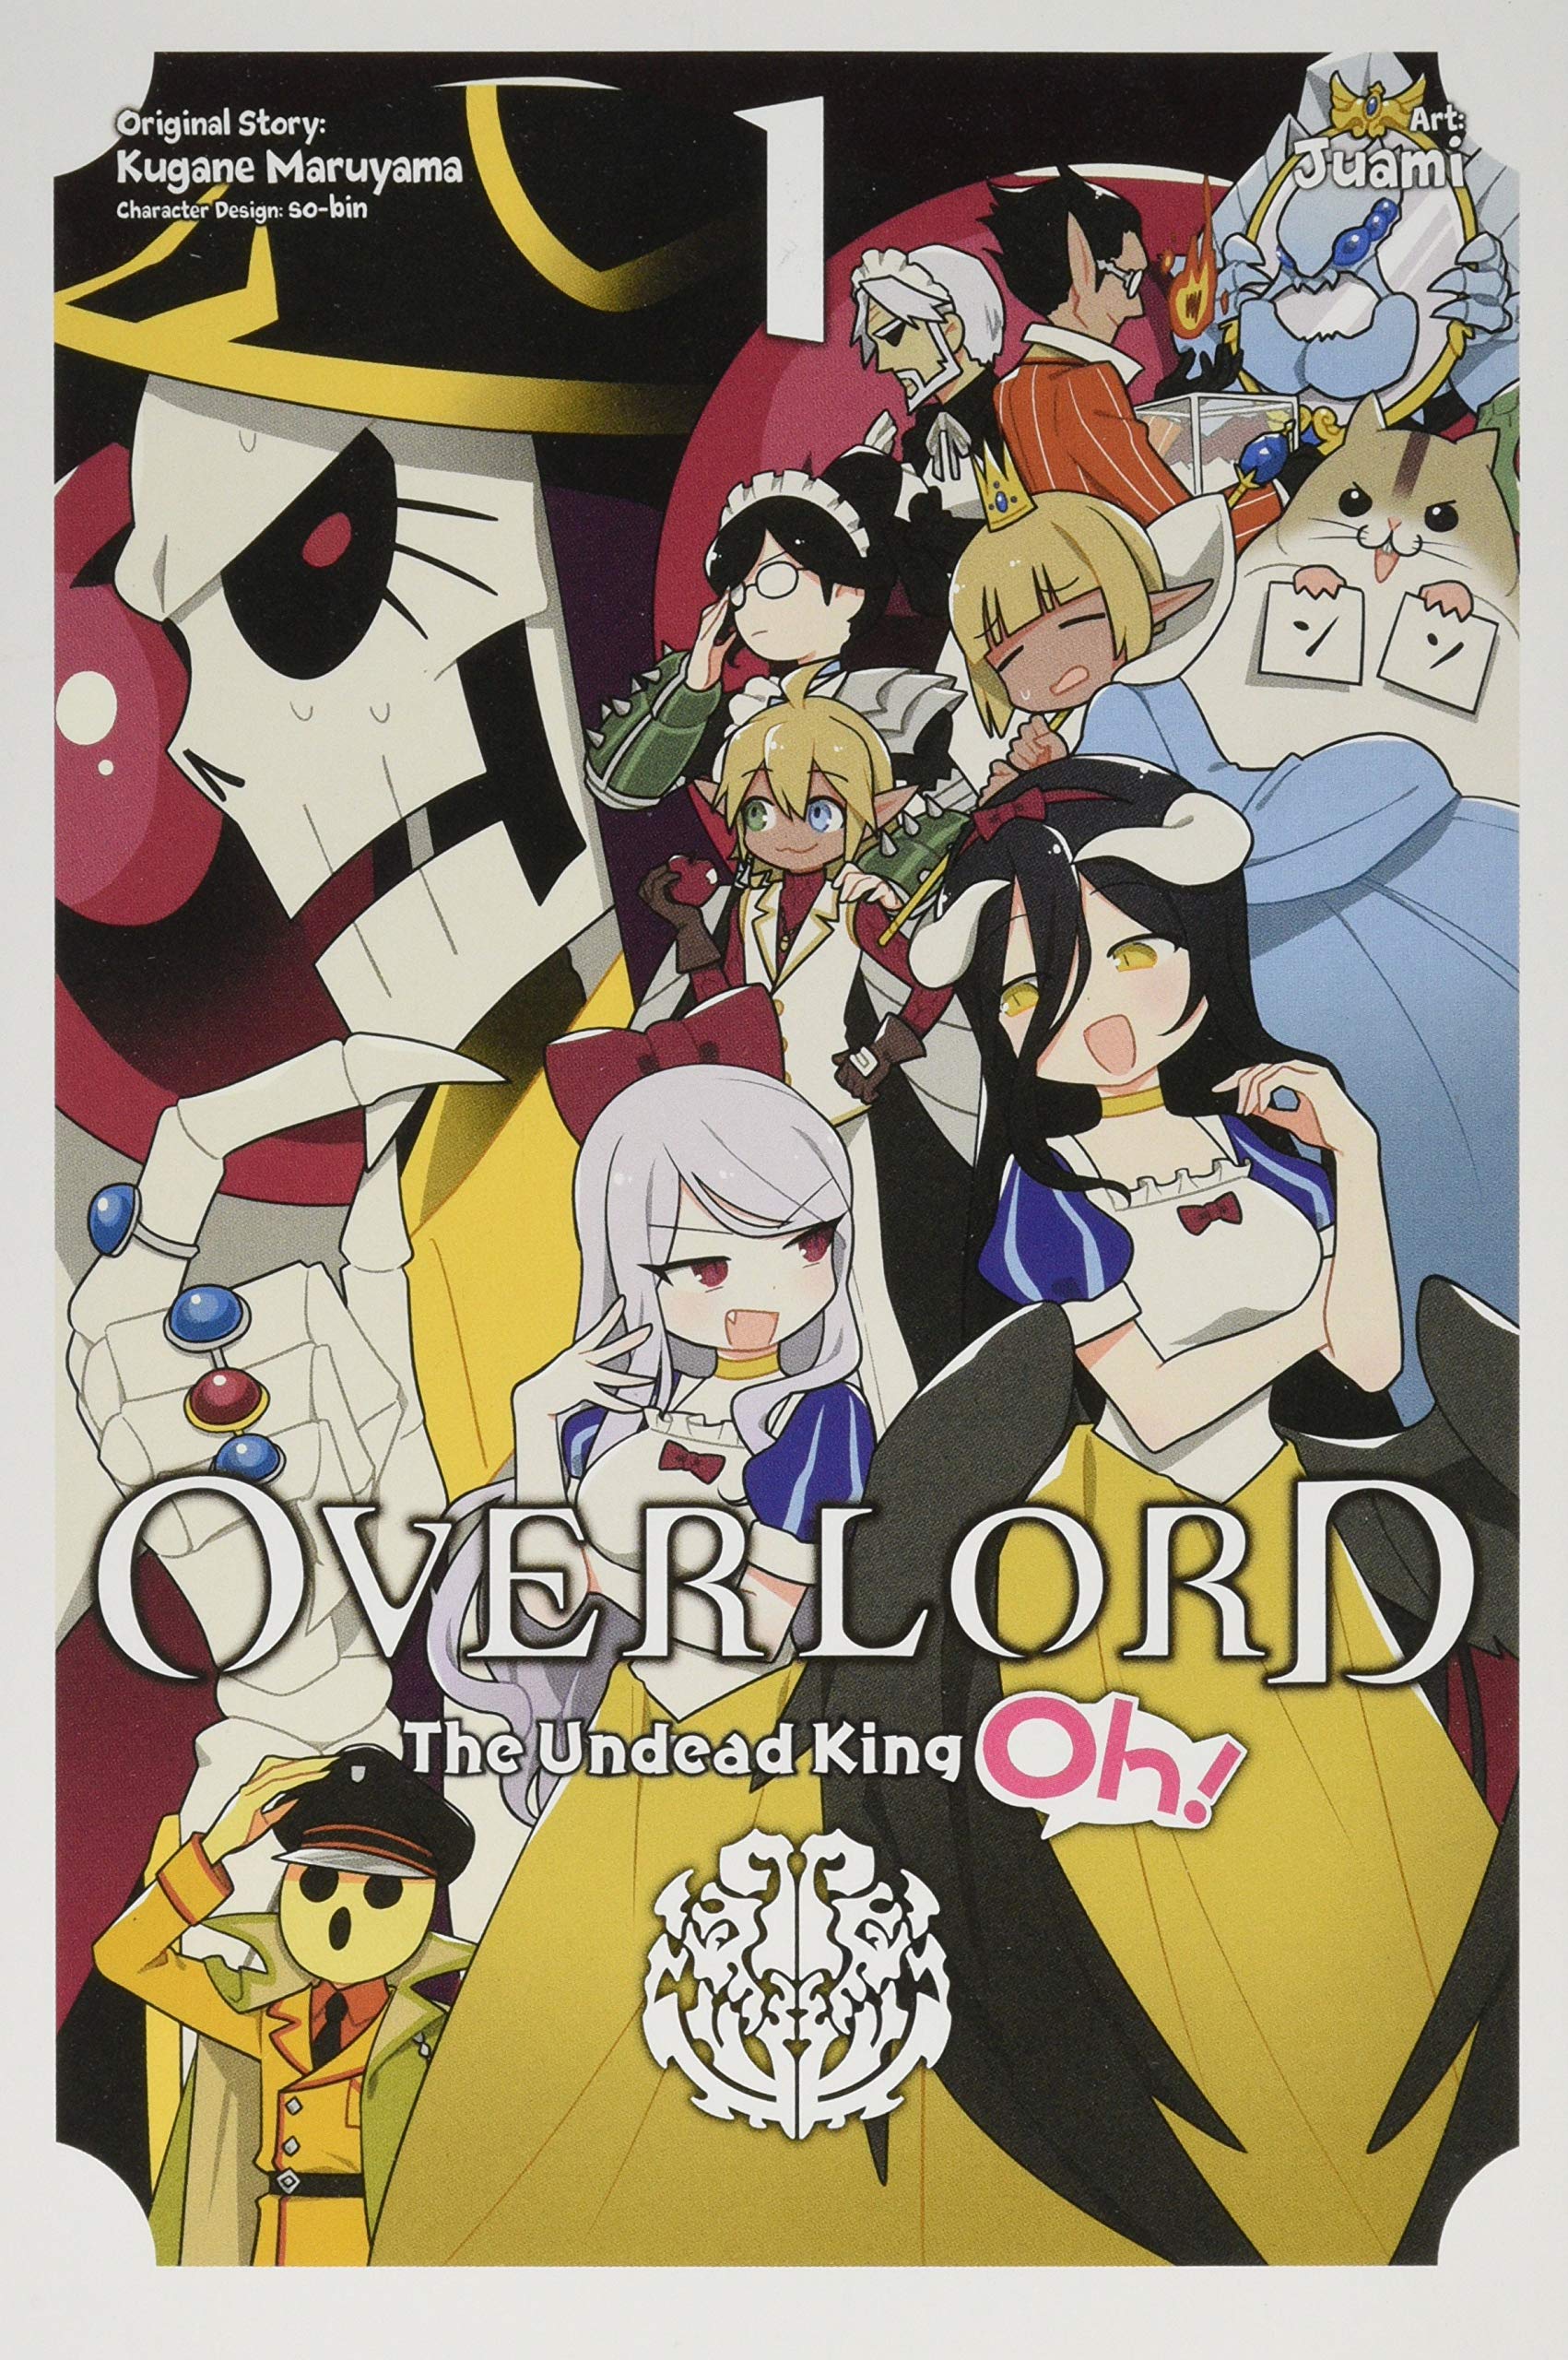 Overlord: The Undead King Oh! Vol.1 | Kugane Maruyama